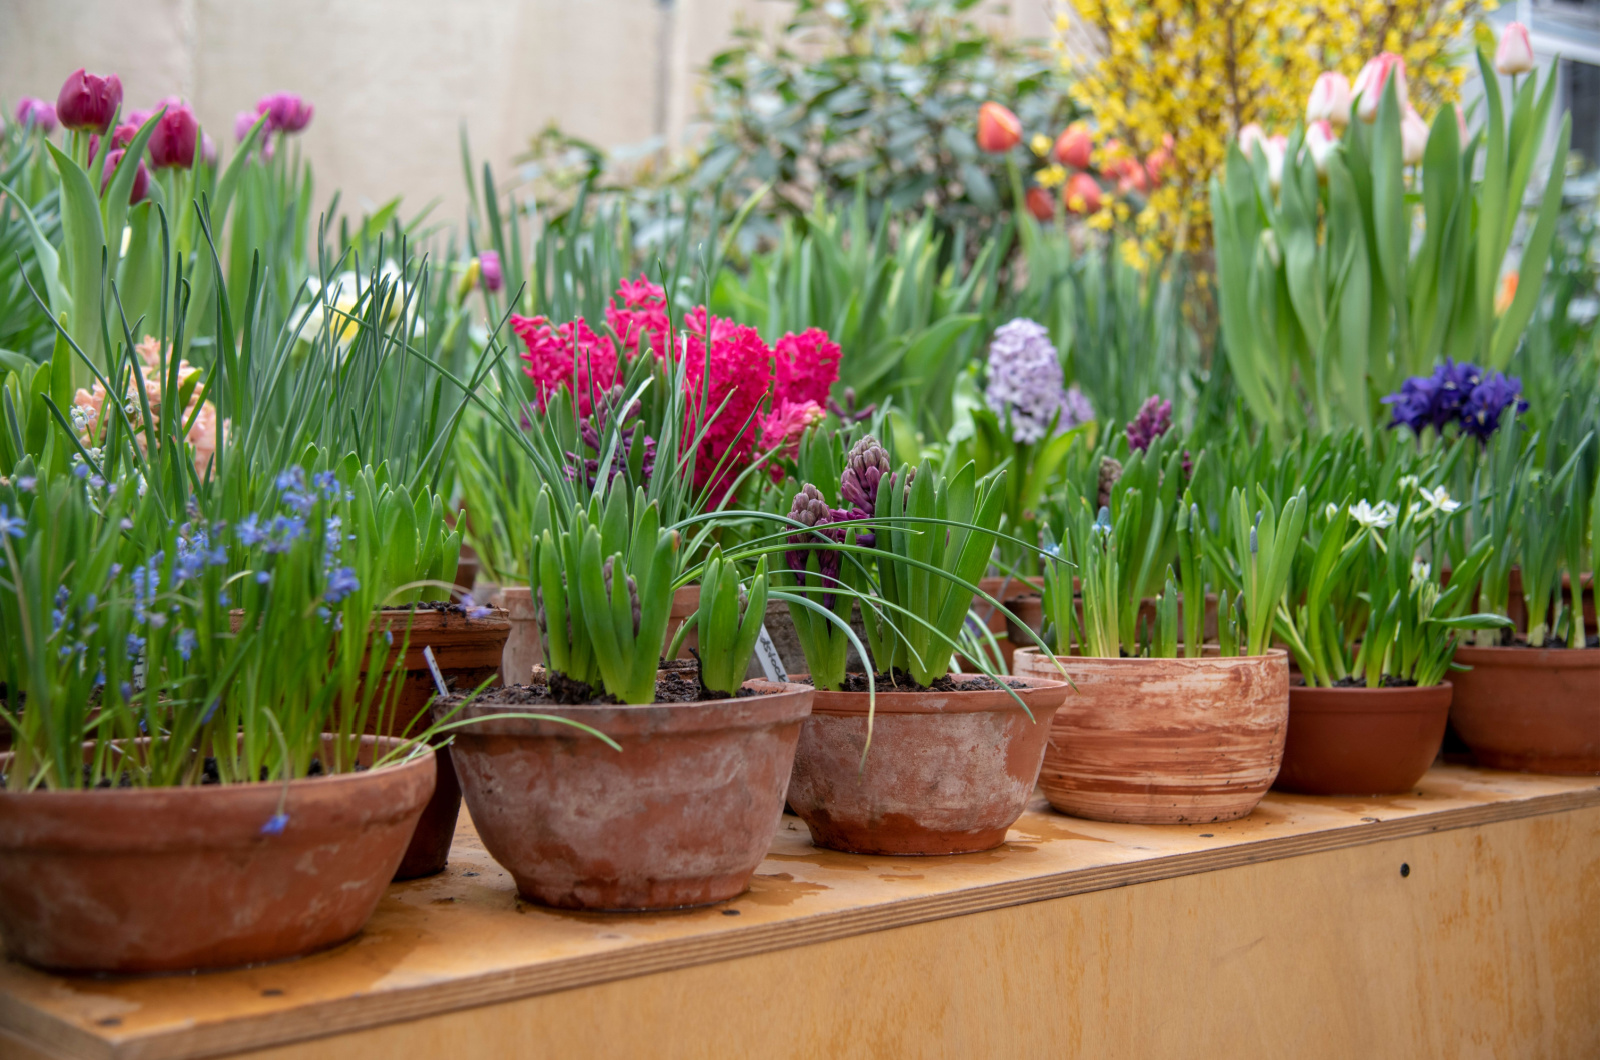 Many ceramic pots with bright spring flowers are arranged in a row